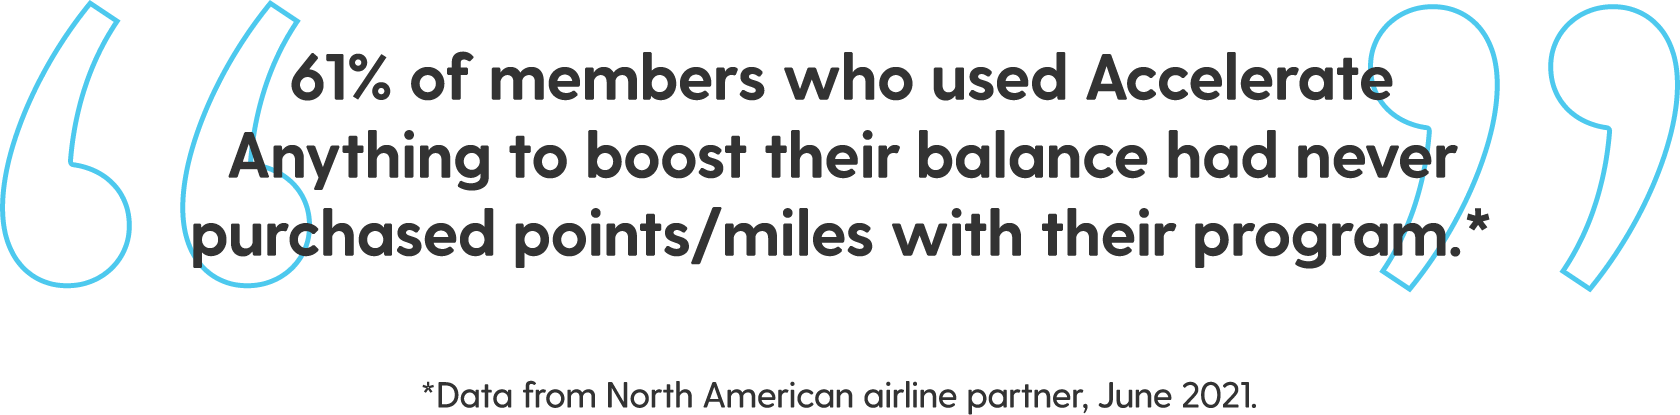 Data quote: 61% of members who used Accelerate Anything to boost their balance had never purchased points/miles with their program.*  *Data from North American airline partner, June 2021.